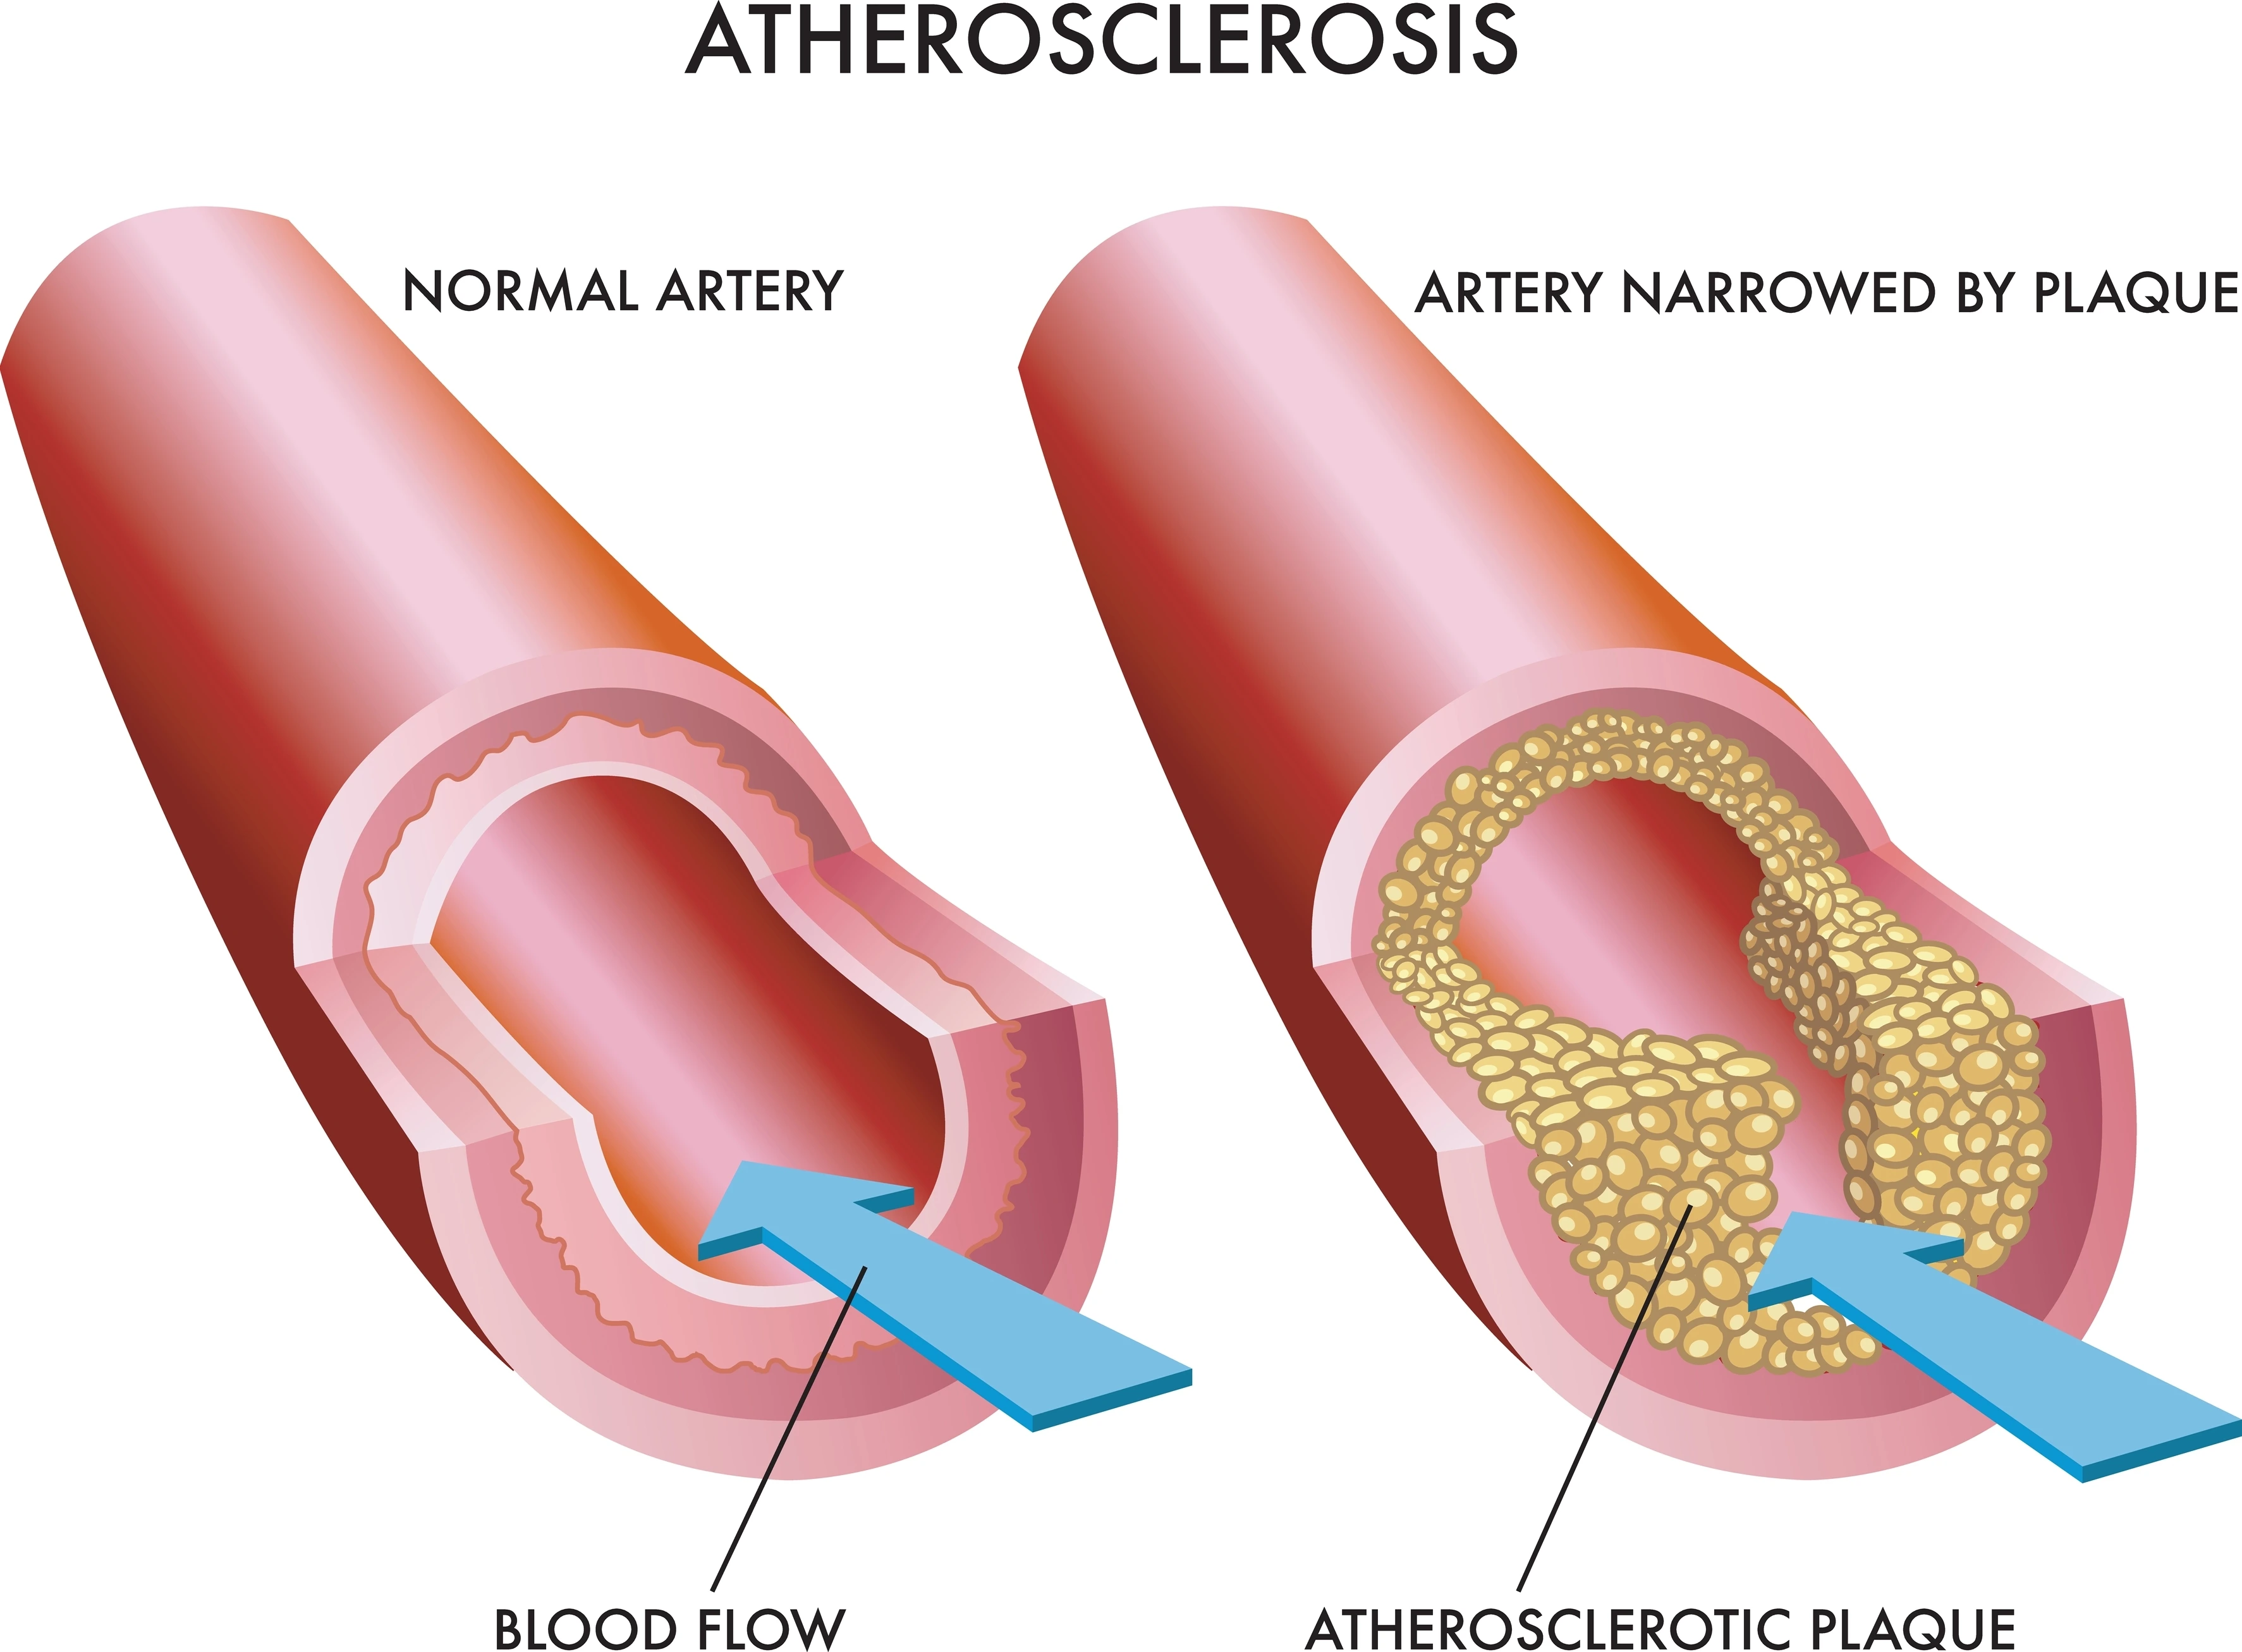 Carotid Intima-Media Thickness Test Can Be Used to Diagnosed Atherosclerosis | https://www.harleystreet.sg/